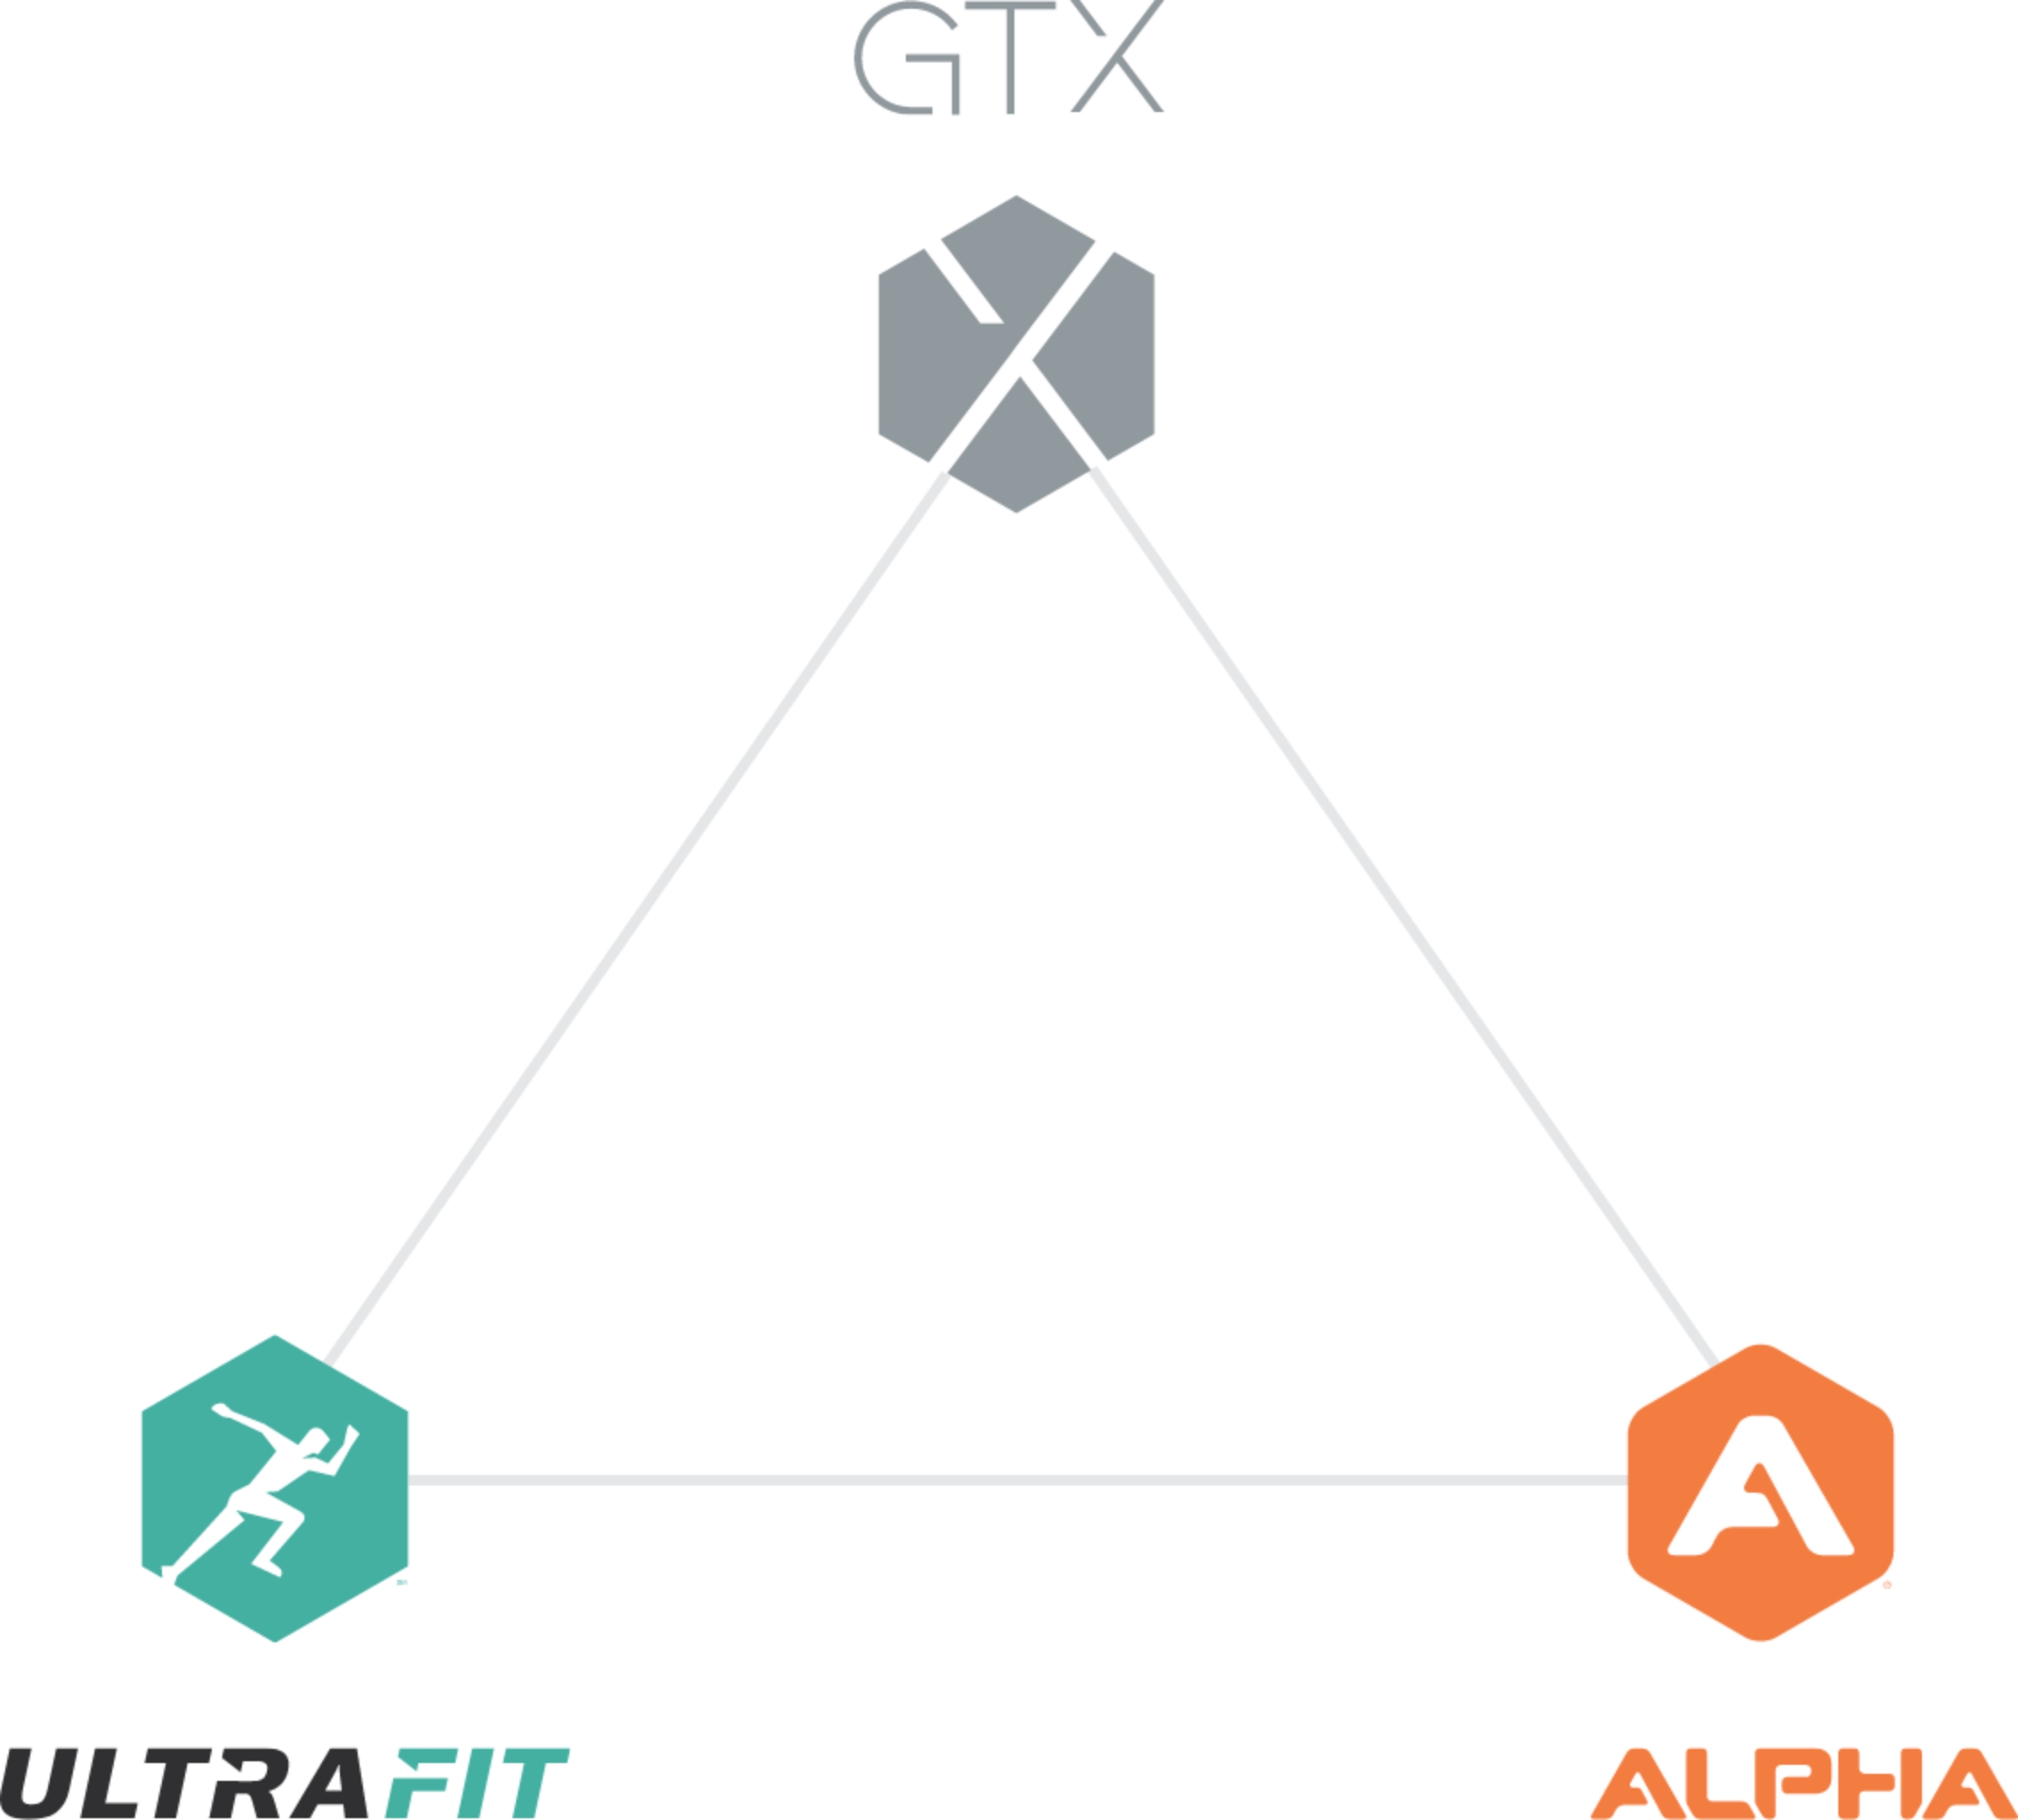 A triangle showcasing GTX, at the top, Alpha, on the lower right, and Ultra Fit, on the lower left